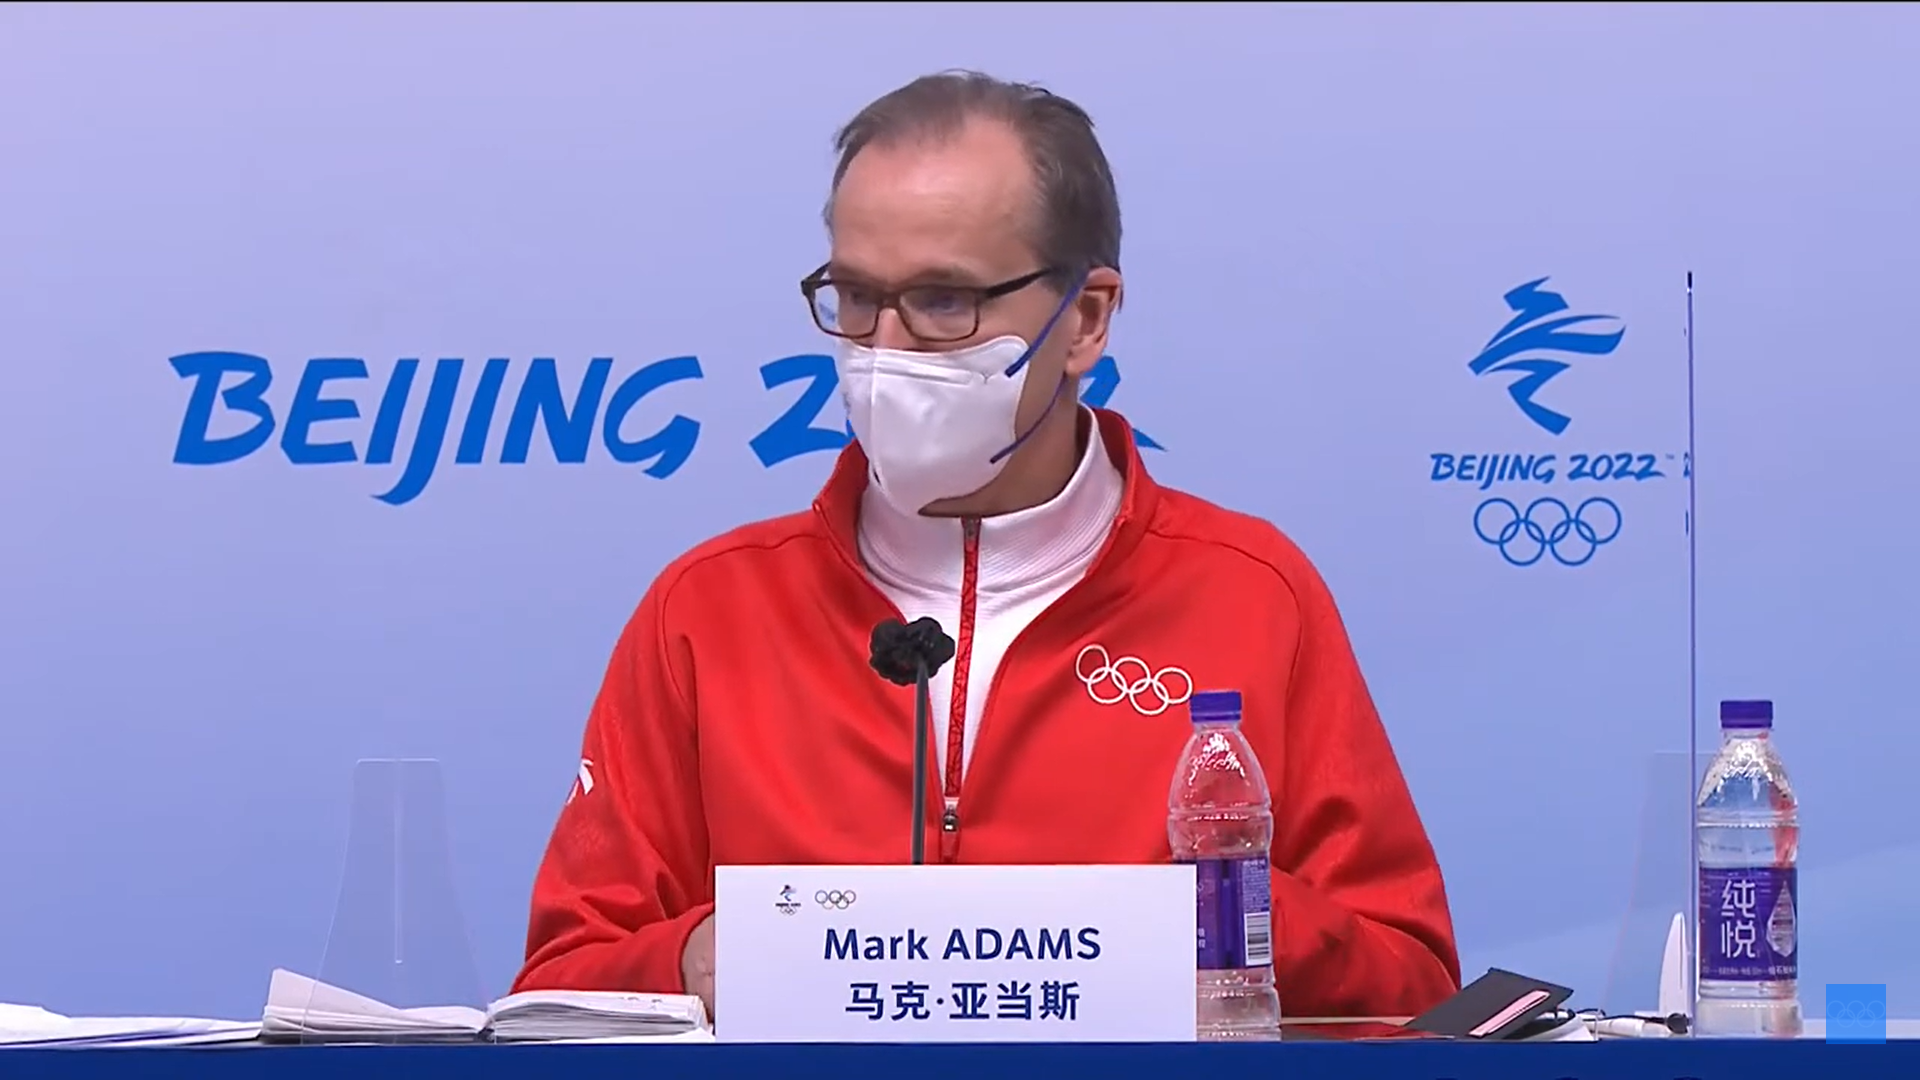 IOC spokesperson Mark Adams said the two cases were not similar in today's press briefing at the Beijing 2022 Winter Olympics ©Getty Images